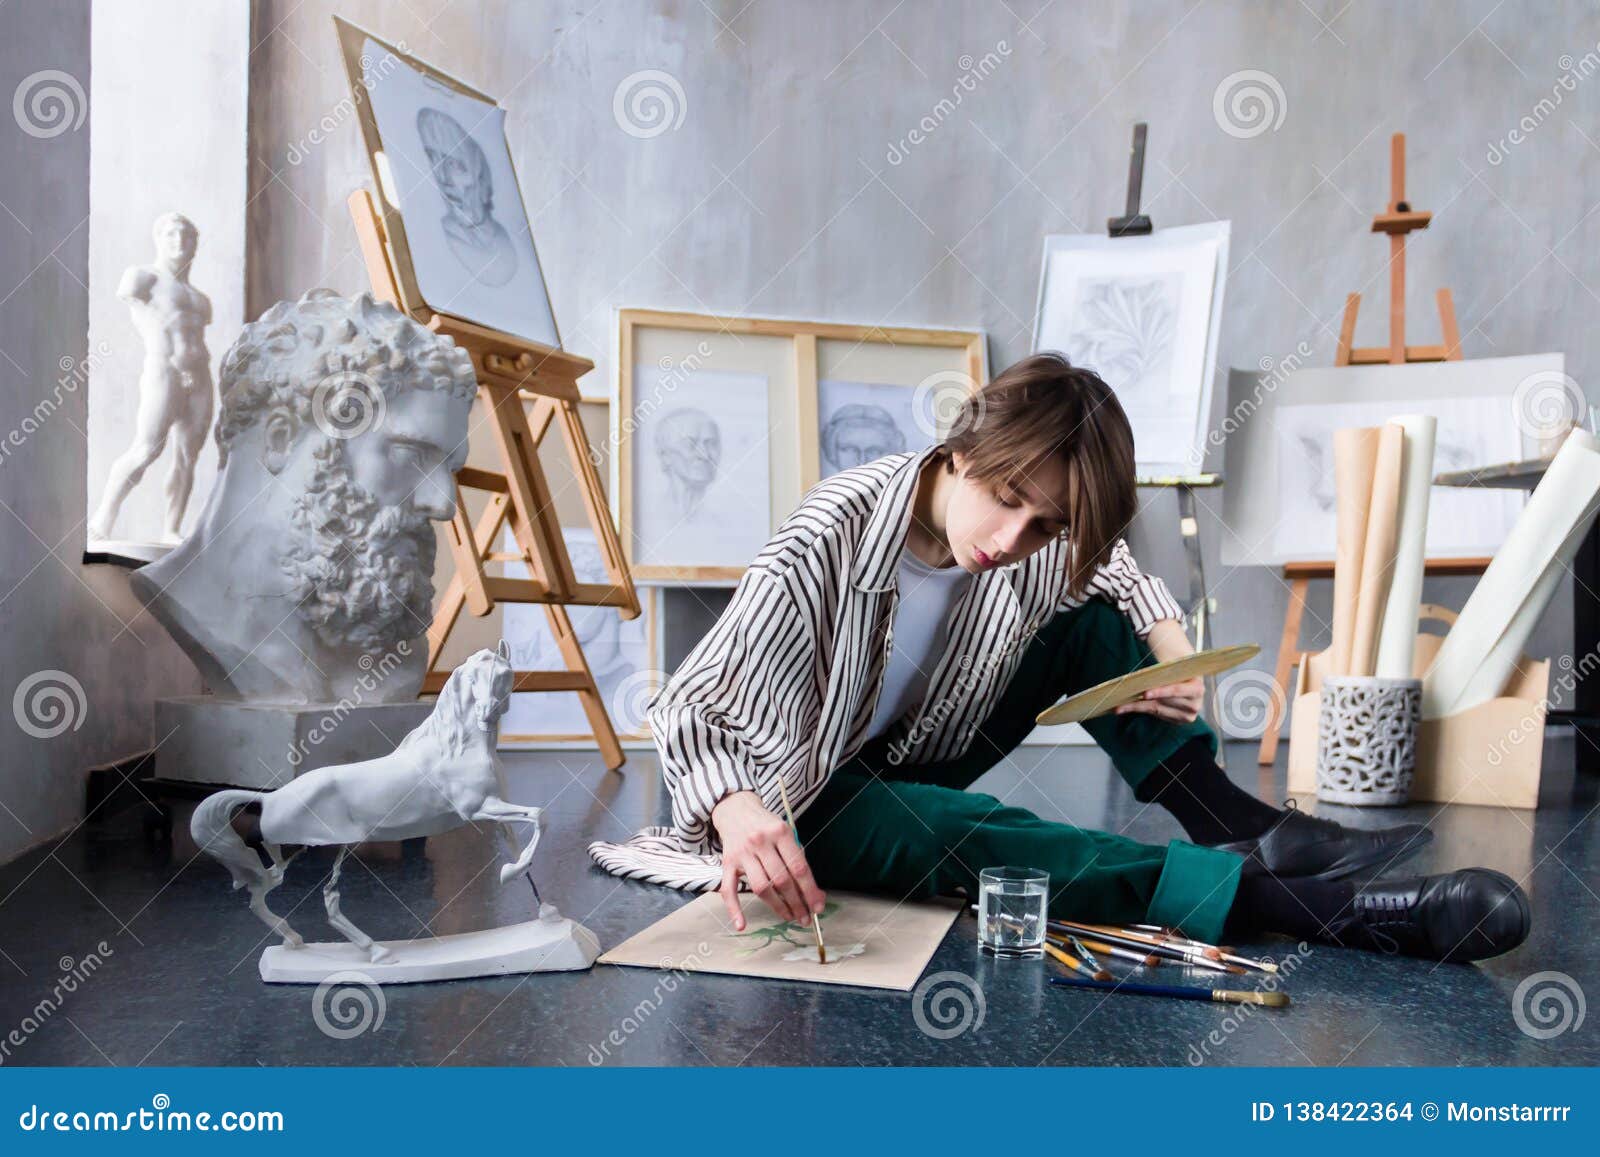 Young Student Artist At Art Workplace Stock Photo Image Of Gypsum